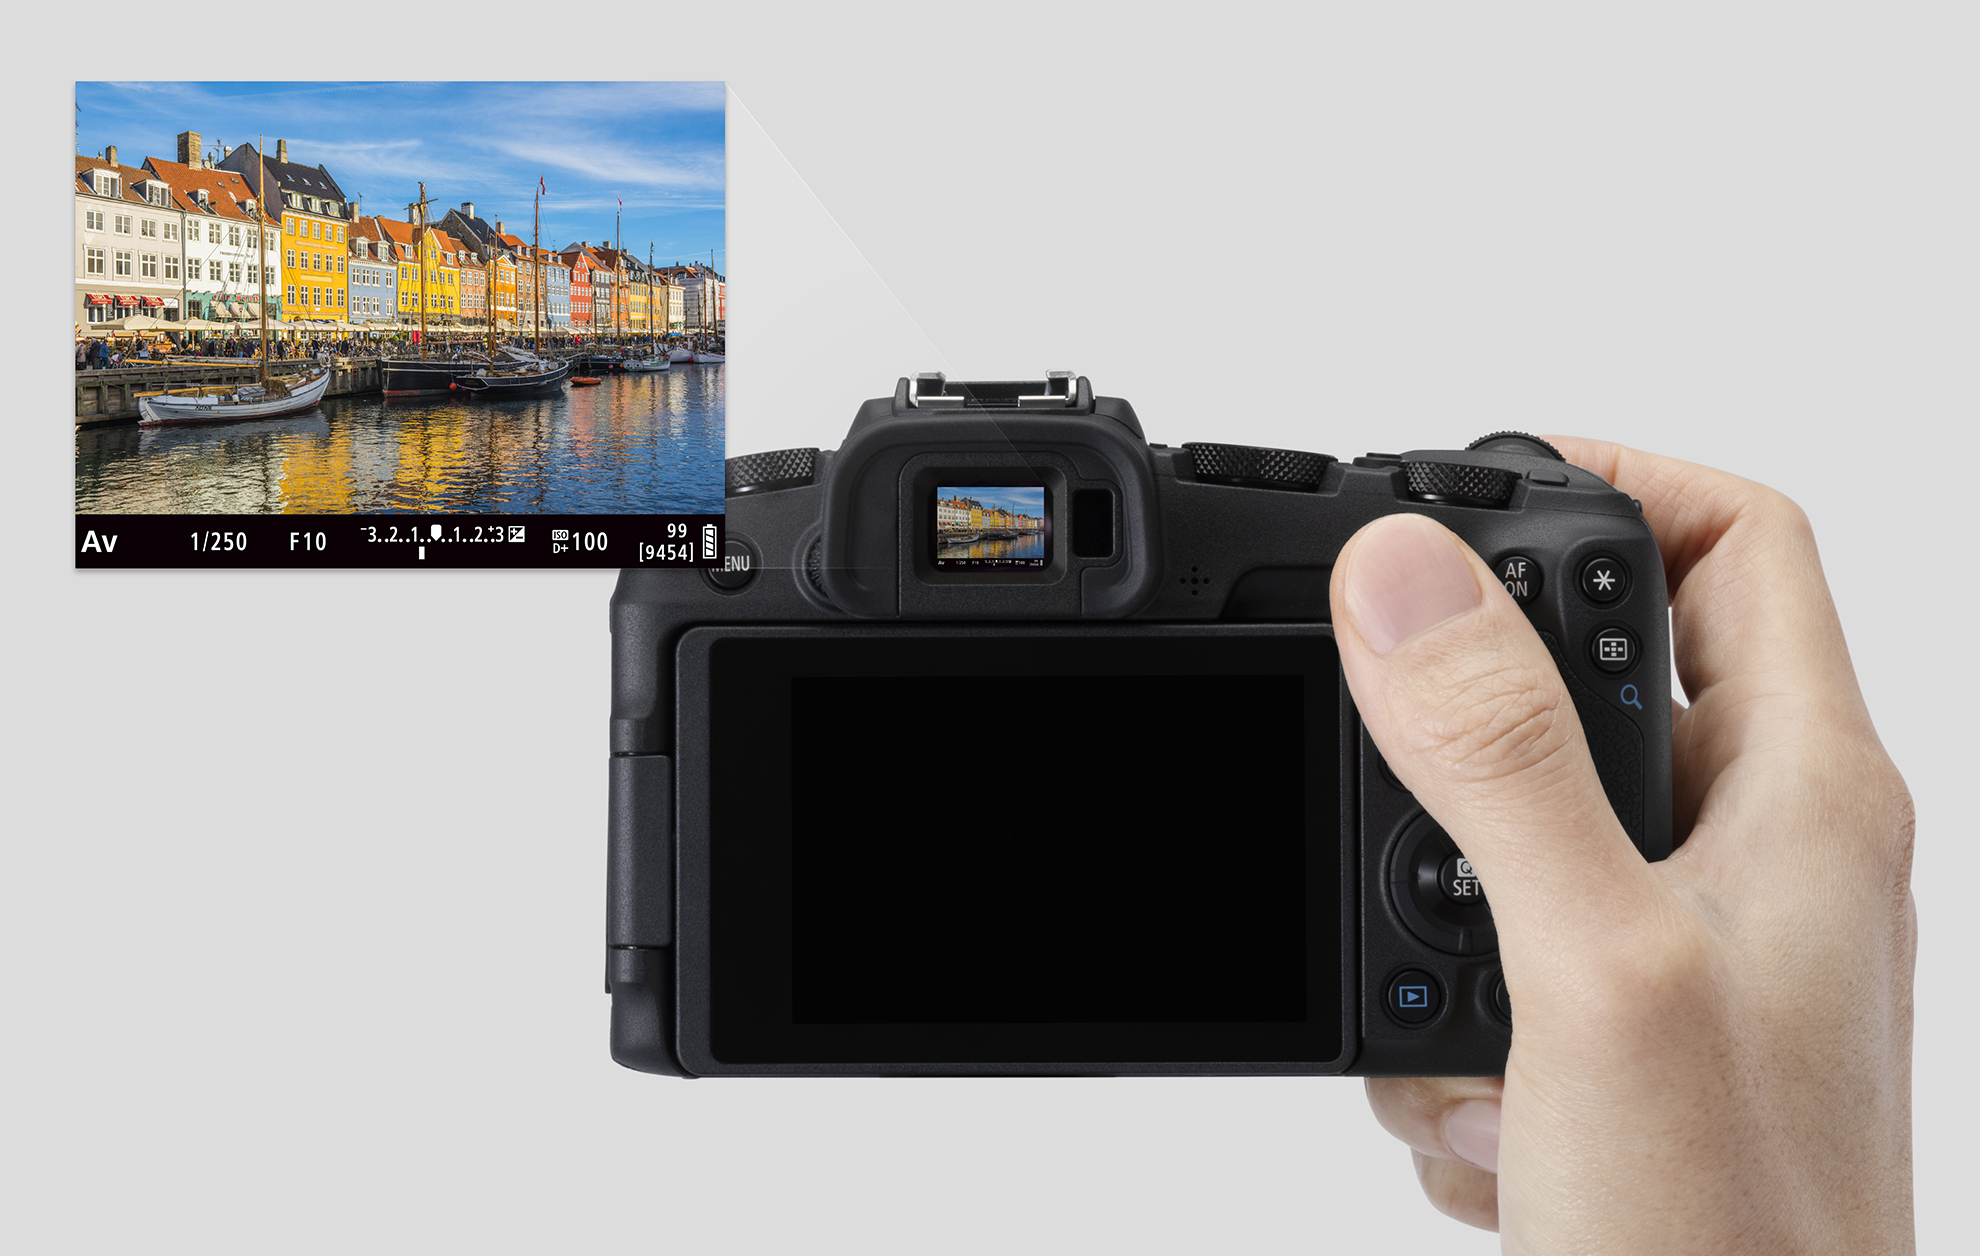 Canon EOS RP Full-frame Mirrorless Camera product image showing viewfinder view